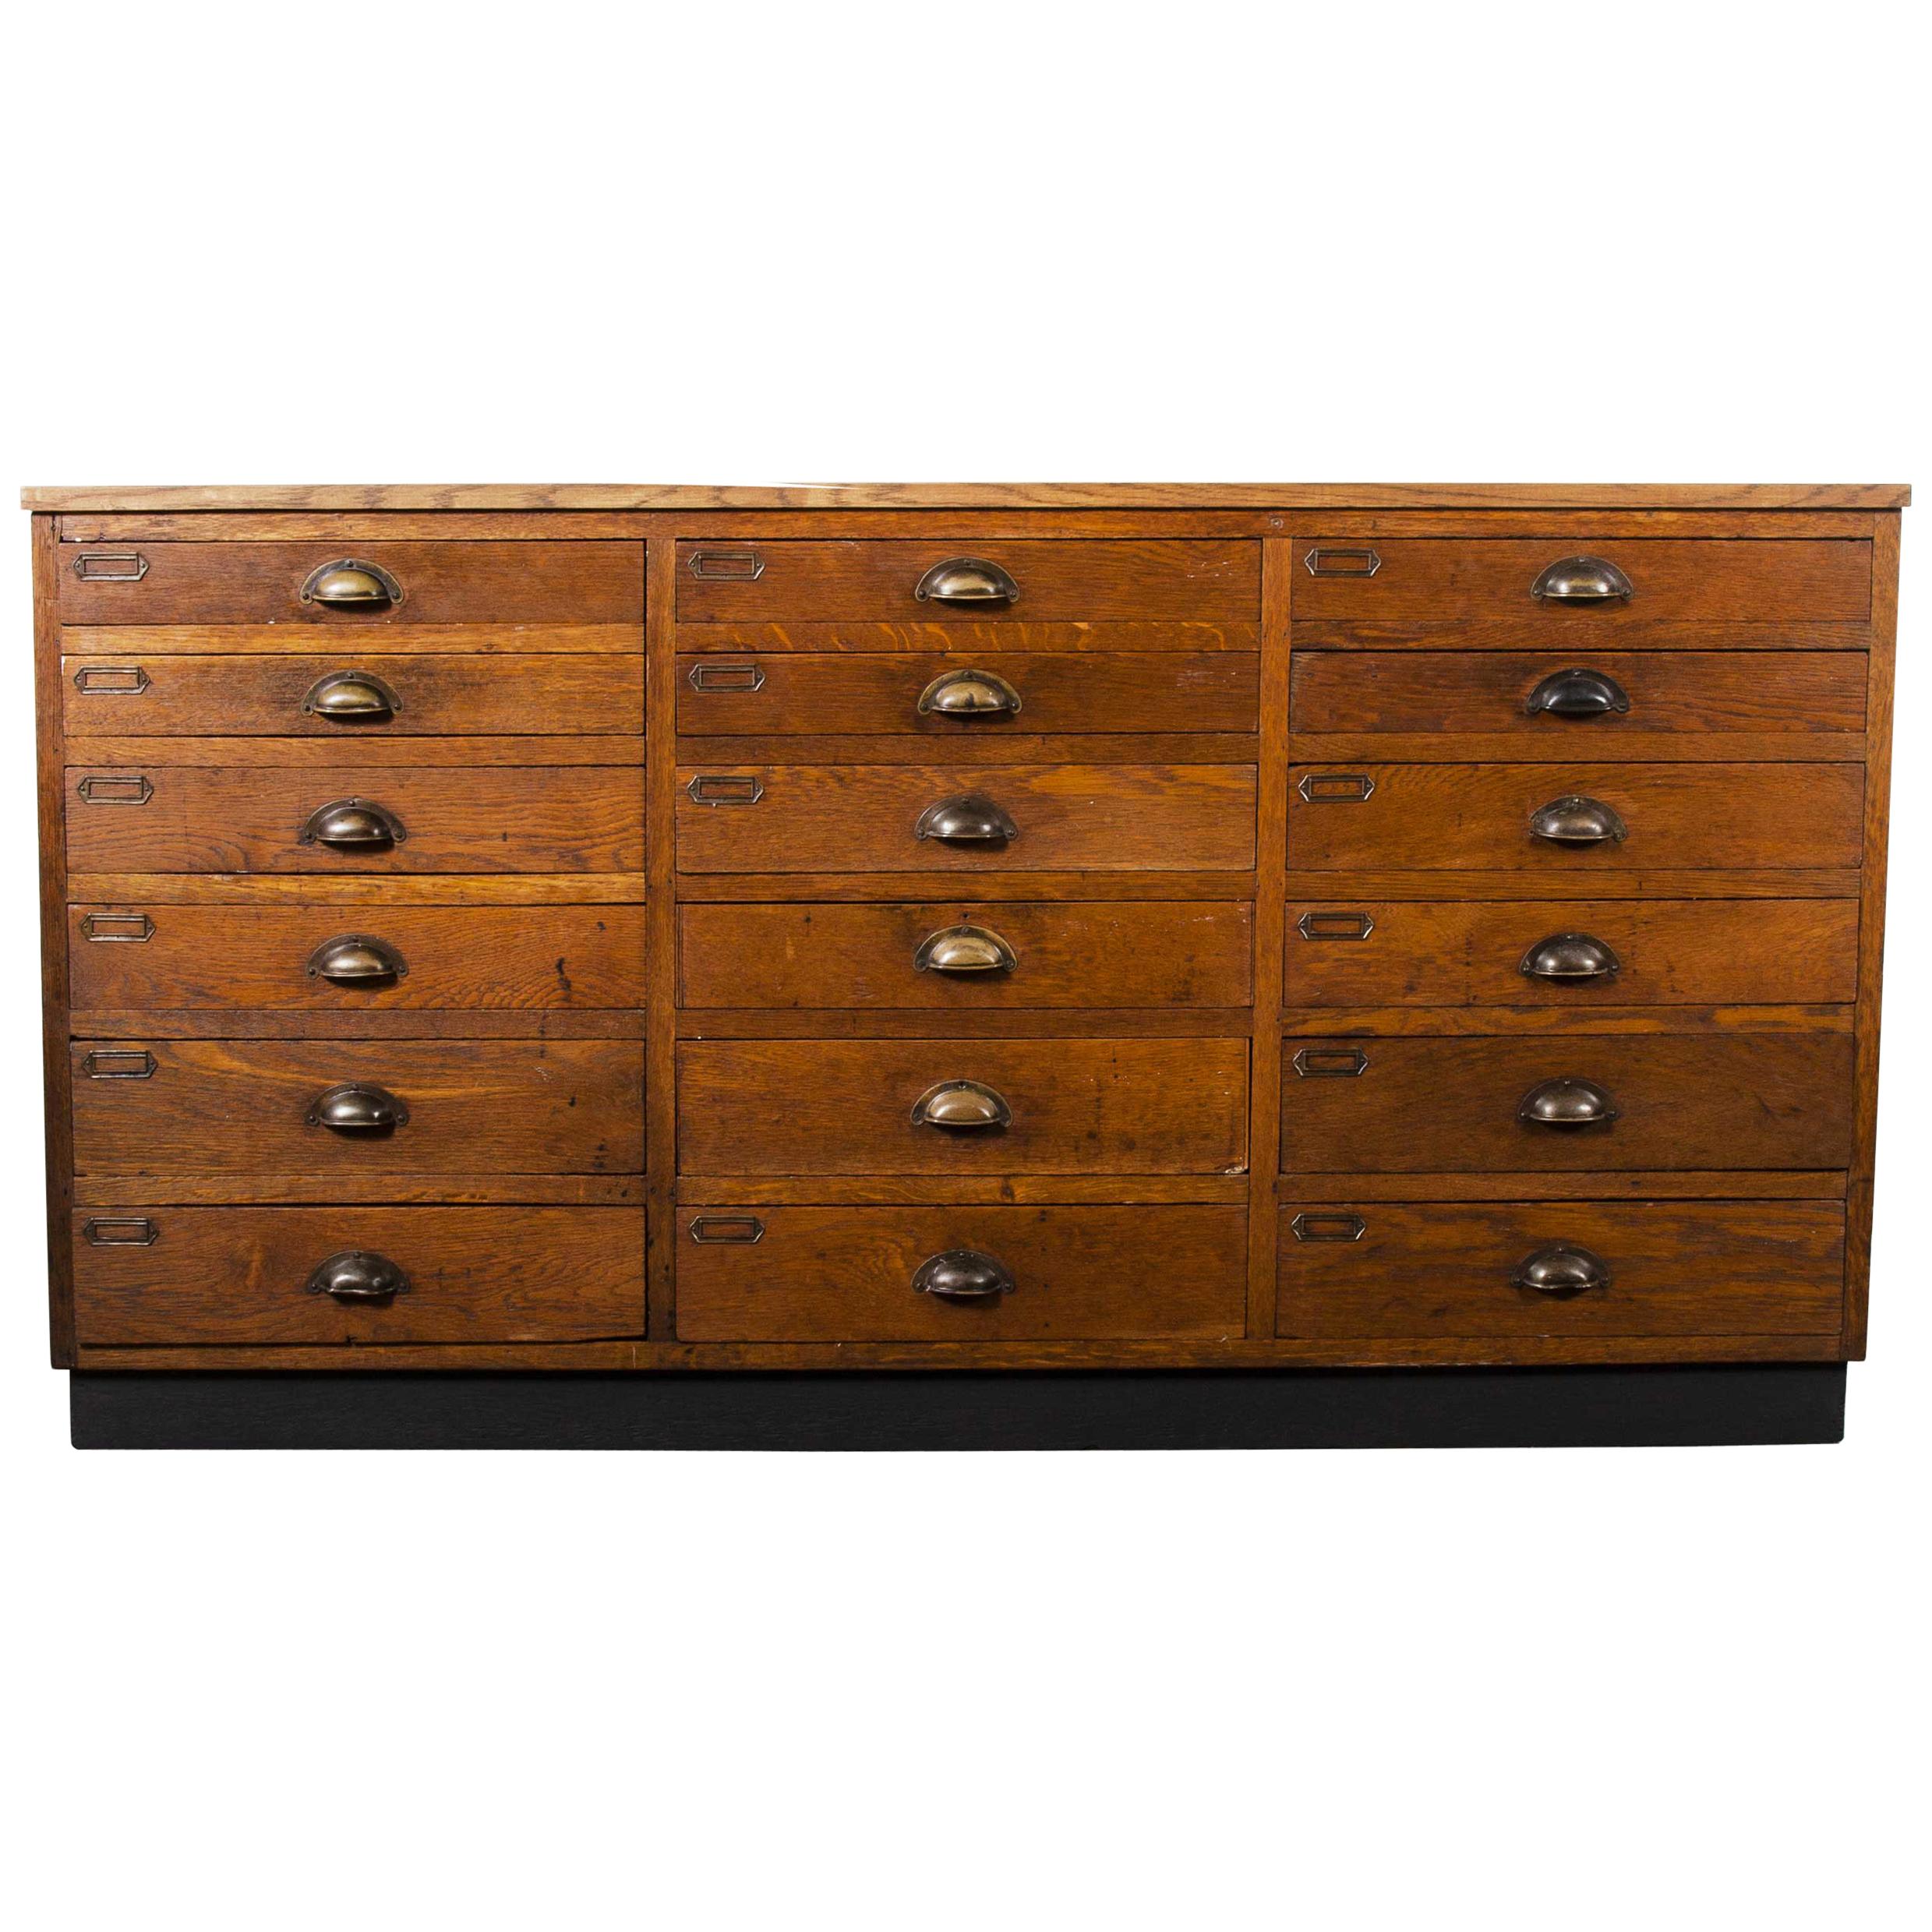 1940s Oak Low Multidrawer Apothercary Chest of Drawers, Eighteen Drawers